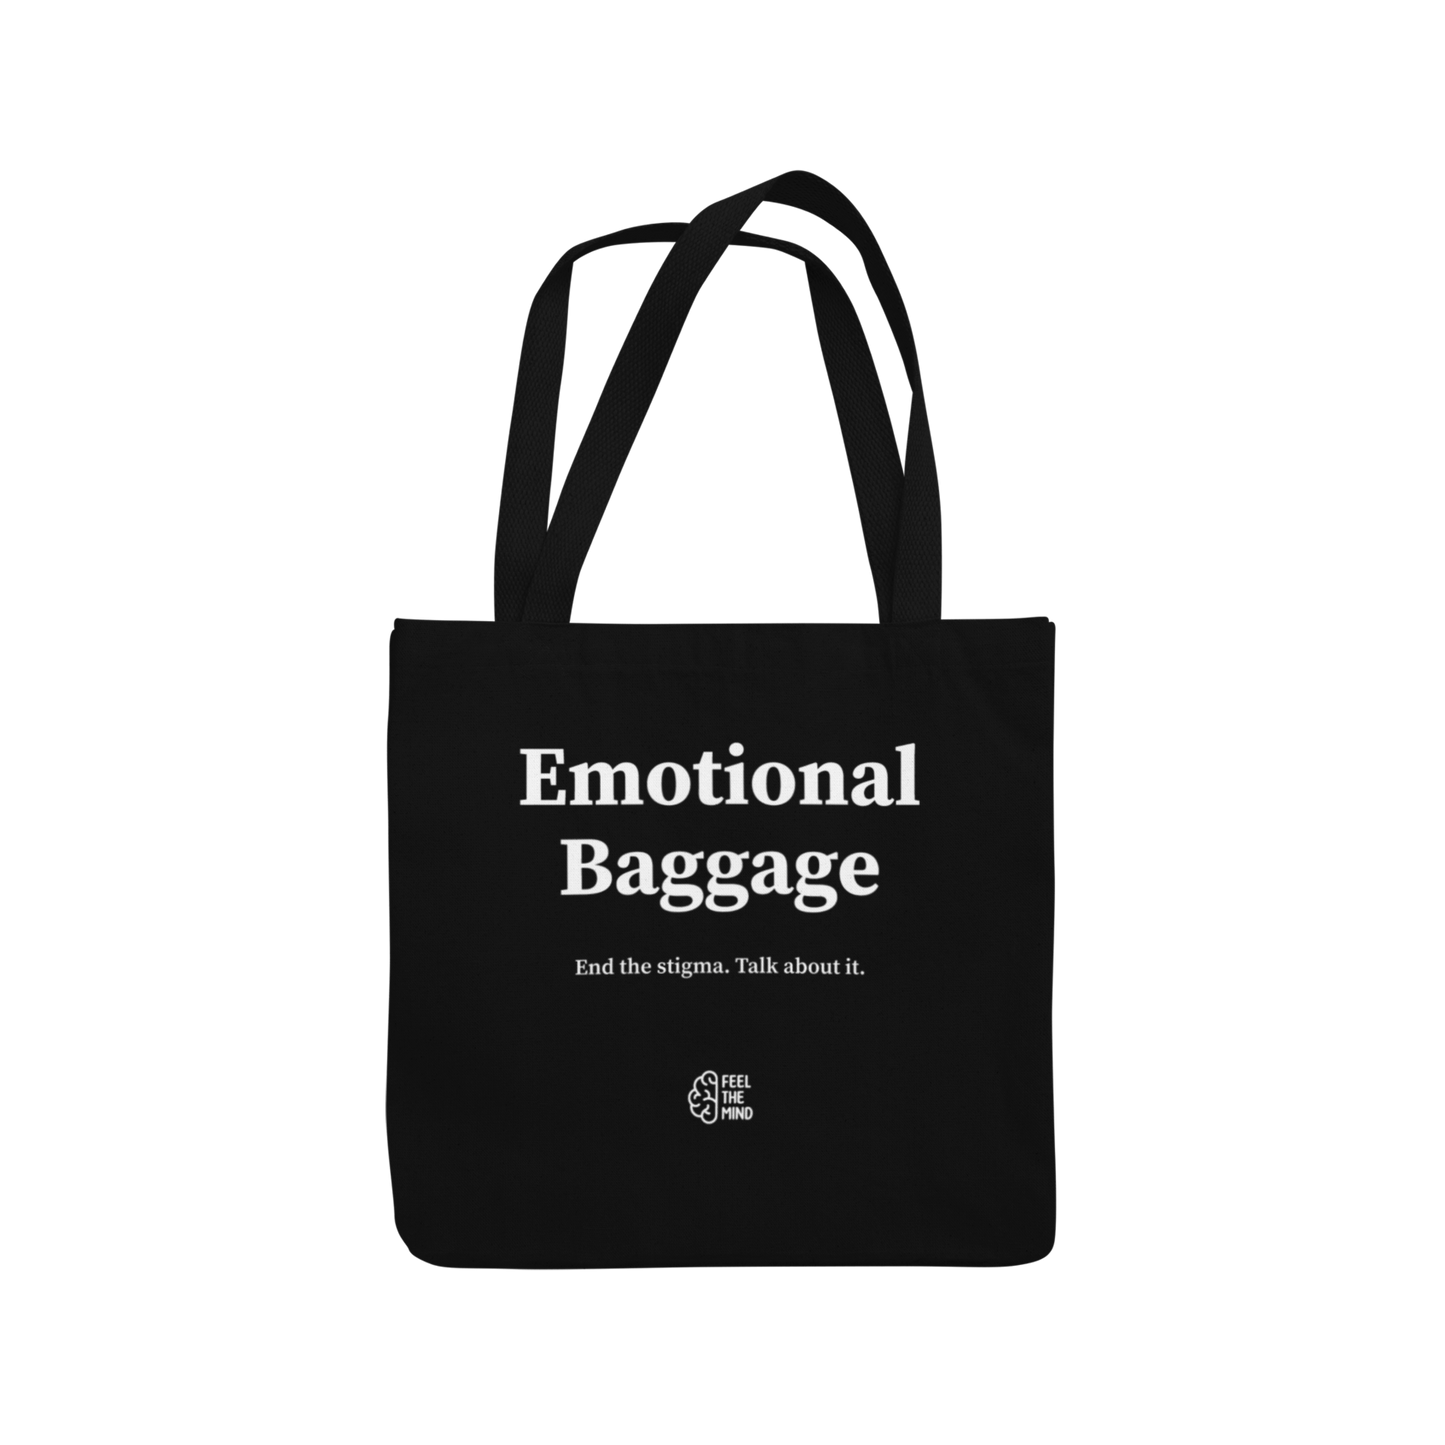 Black colored tote bag with "emotional baggage" on it